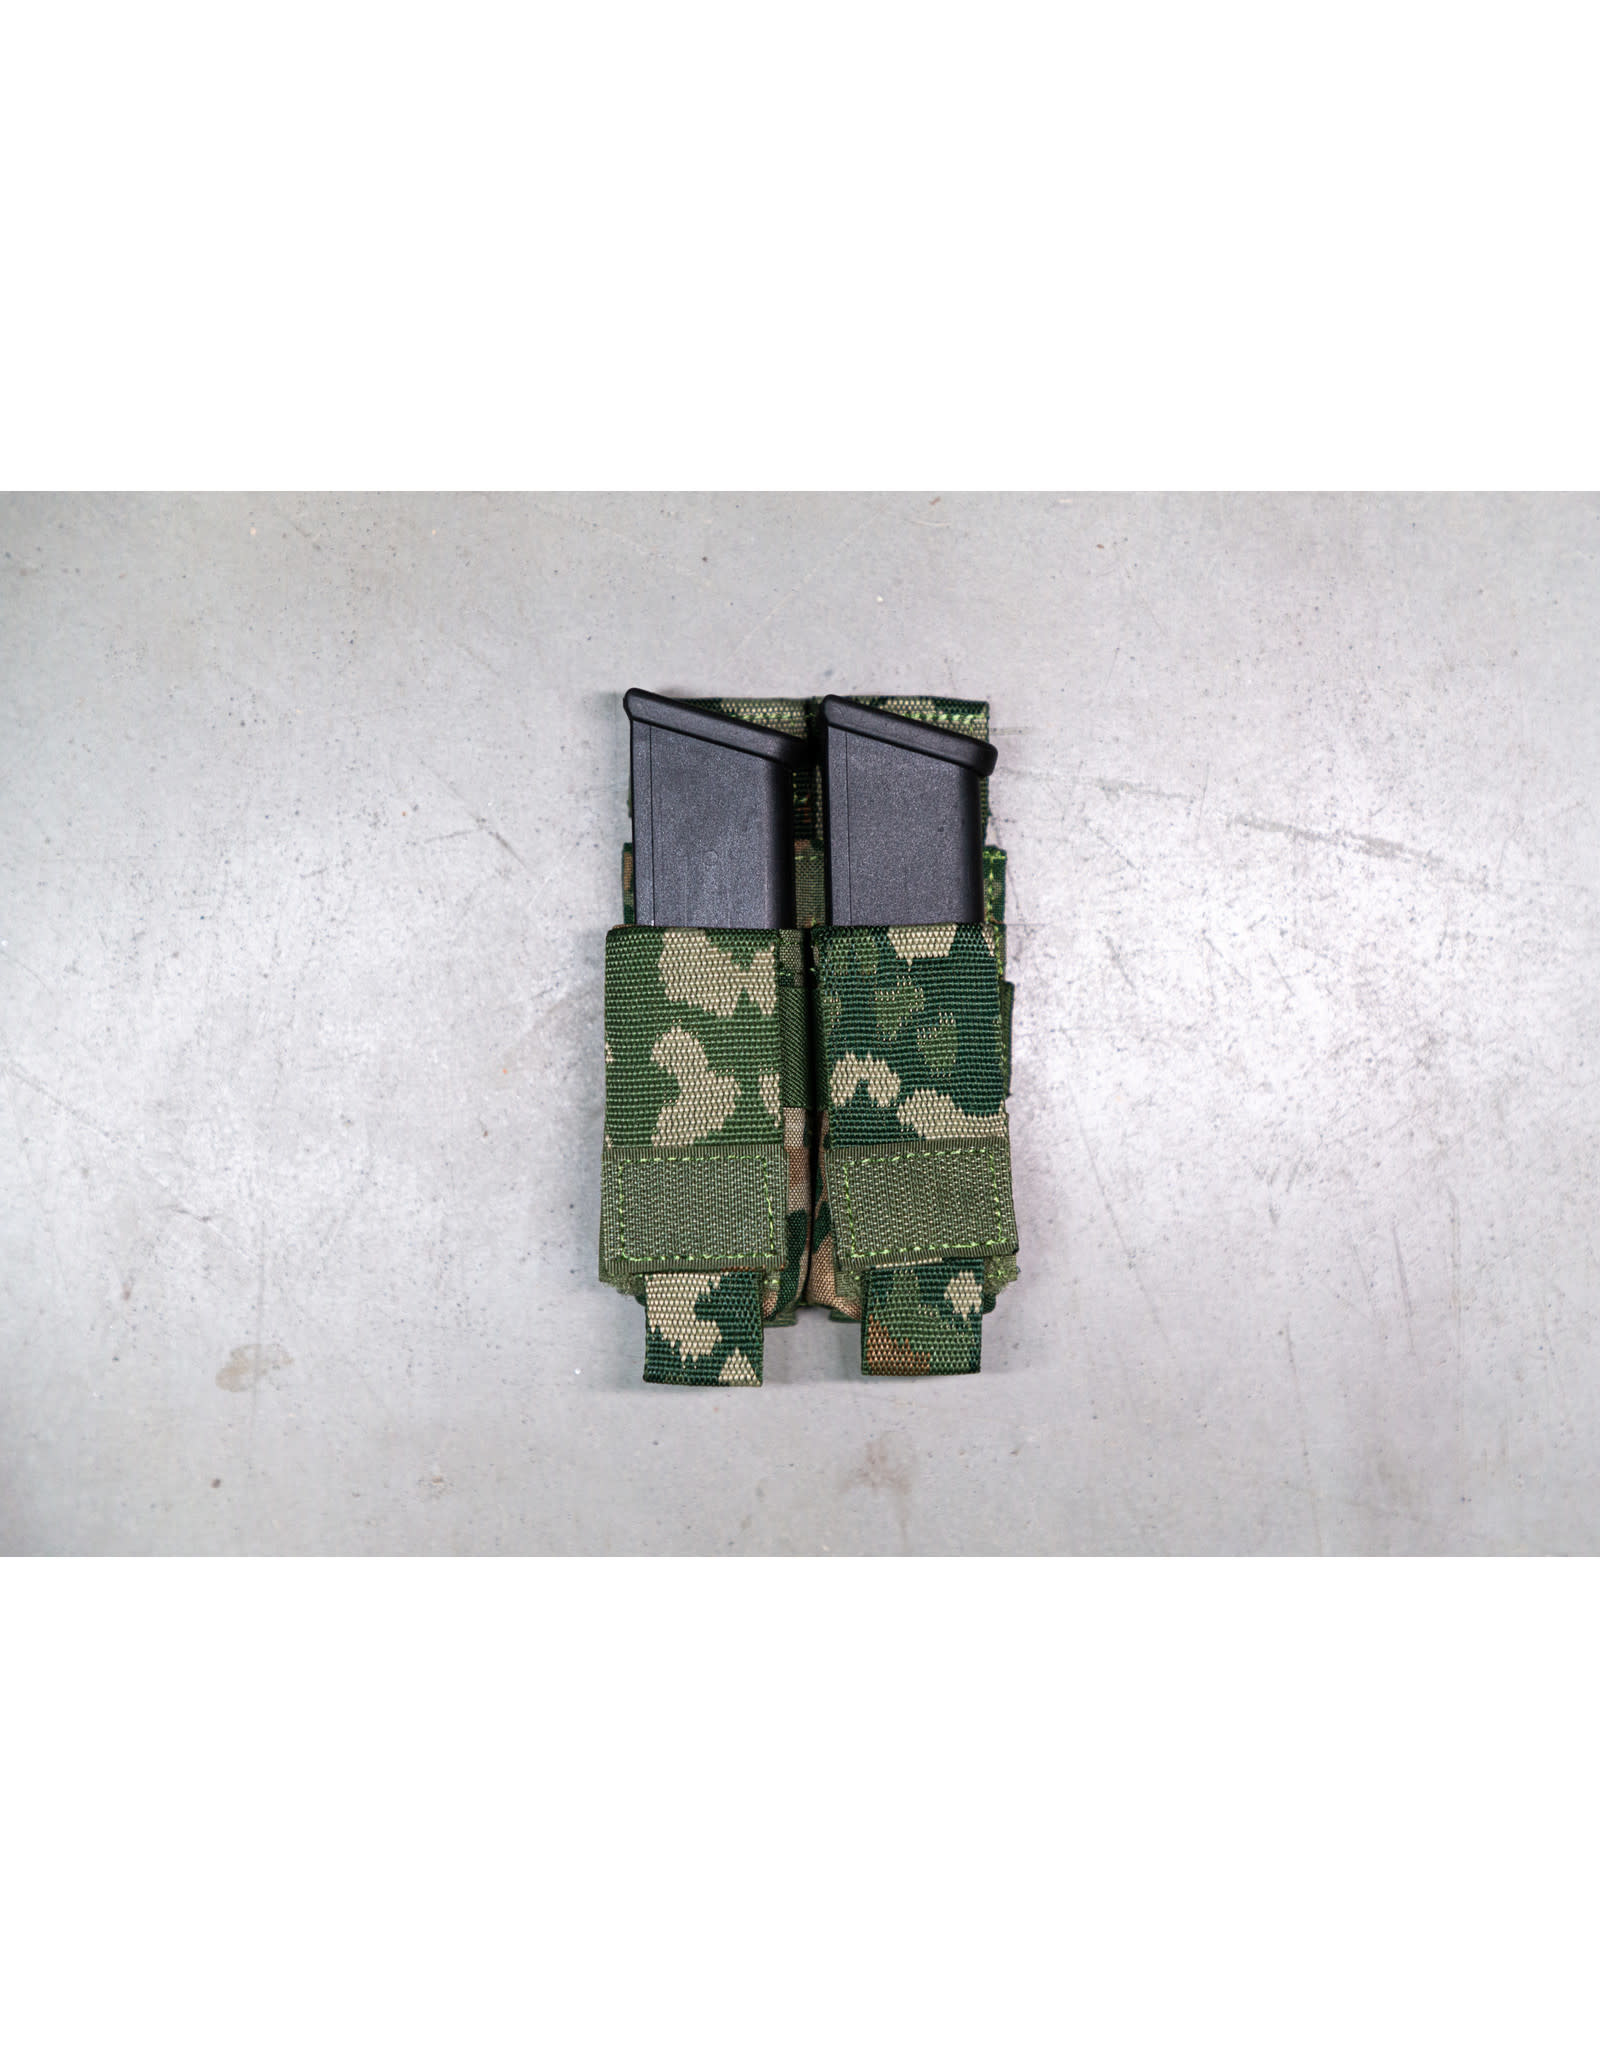 Dutch Tactical Gear Double Pistol Speed Action Pouch - NFP